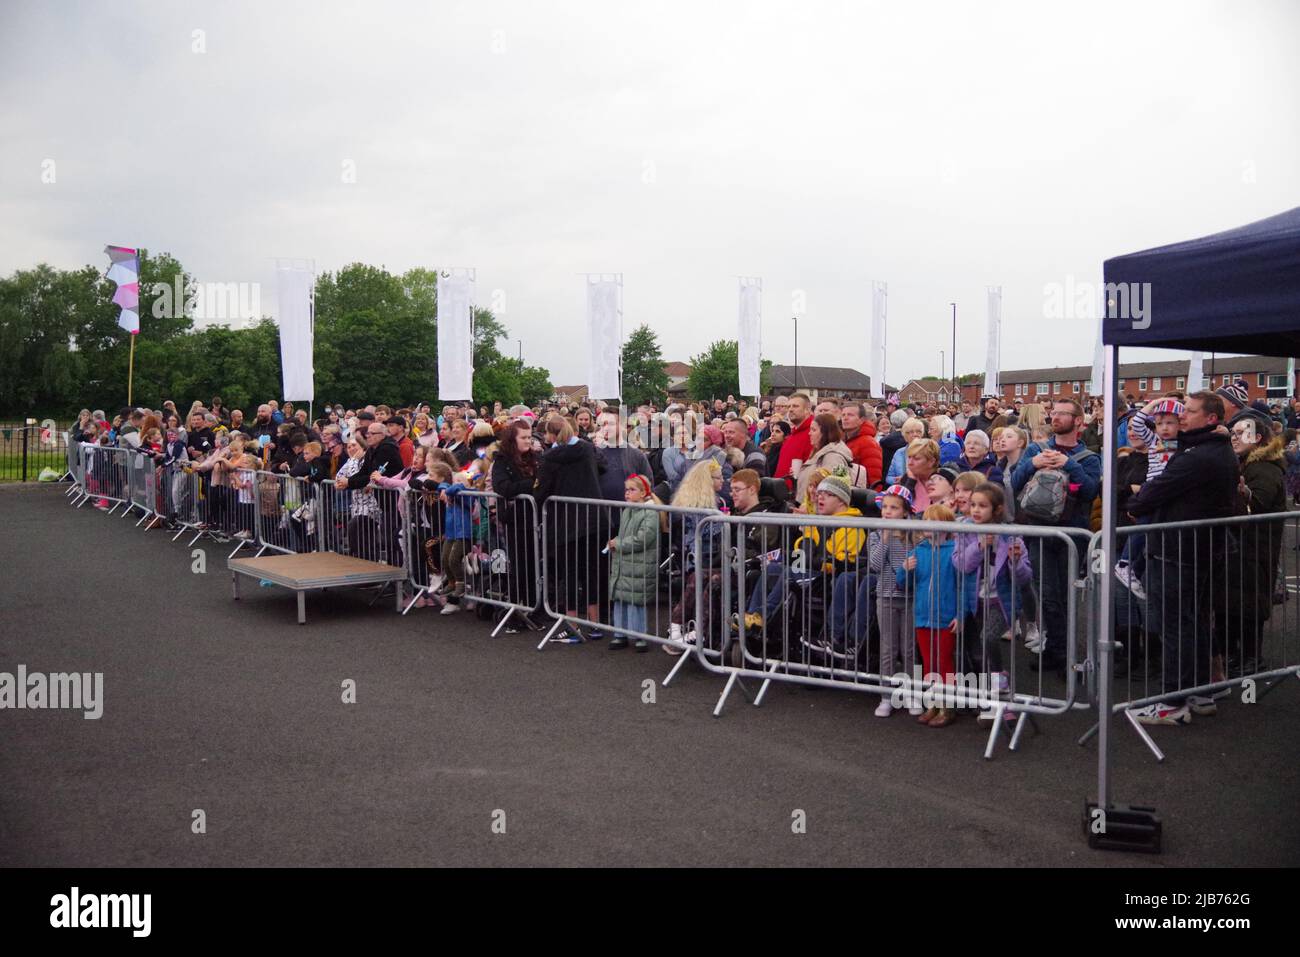 Wallsend, England, 2 June 2022. The crowd at the Queen’s Platinum Jubilee event at Segedunum Roman Fort. Credit: Colin Edwards Stock Photo